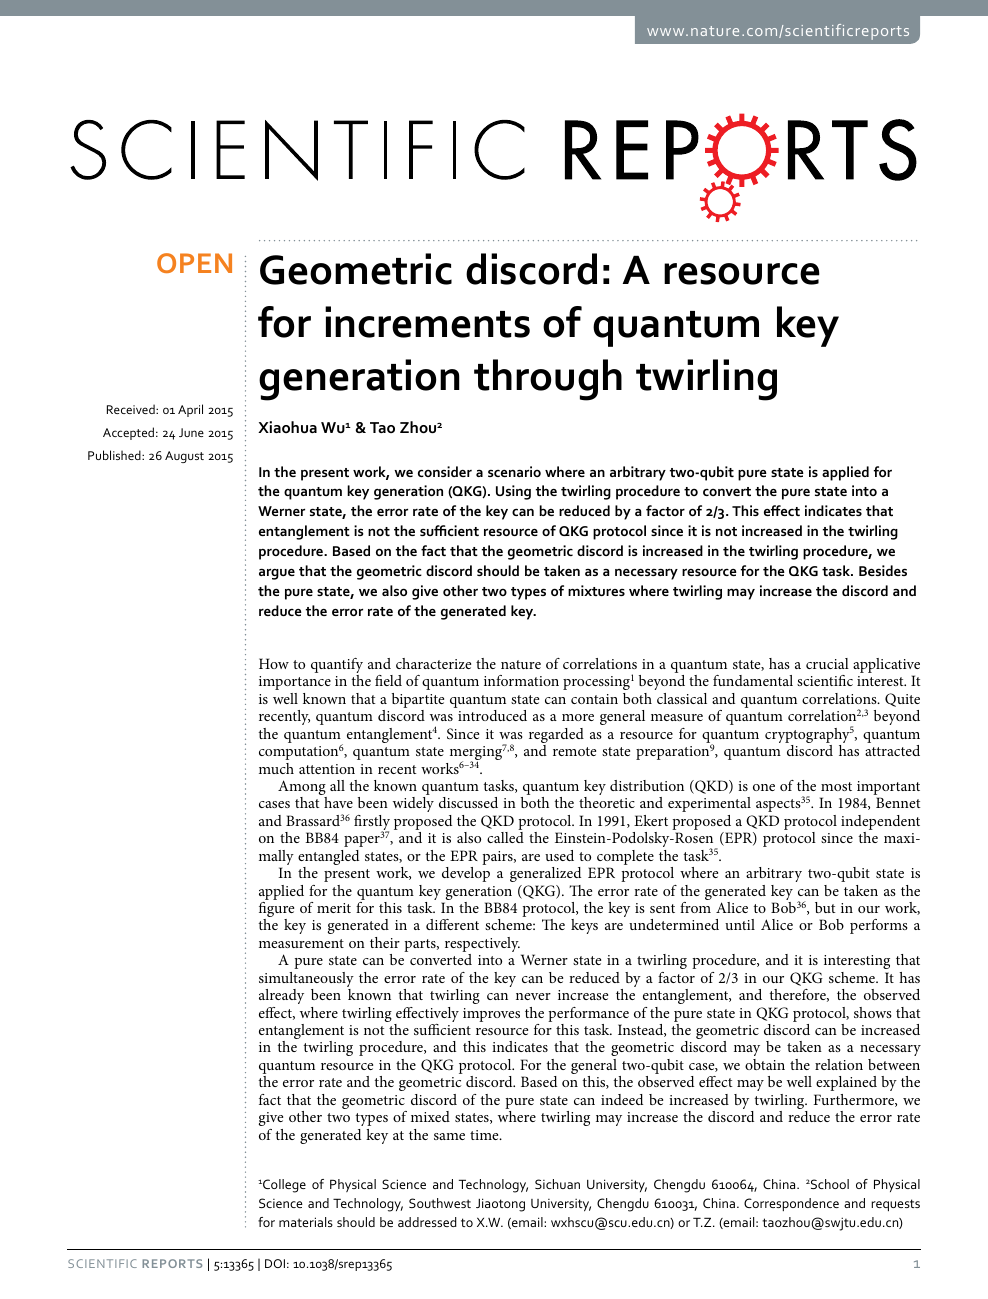 Geometric Discord A Resource For Increments Of Quantum Key Generation Through Twirling Topic Of Research Paper In Physical Sciences Download Scholarly Article Pdf And Read For Free On Cyberleninka Open Science